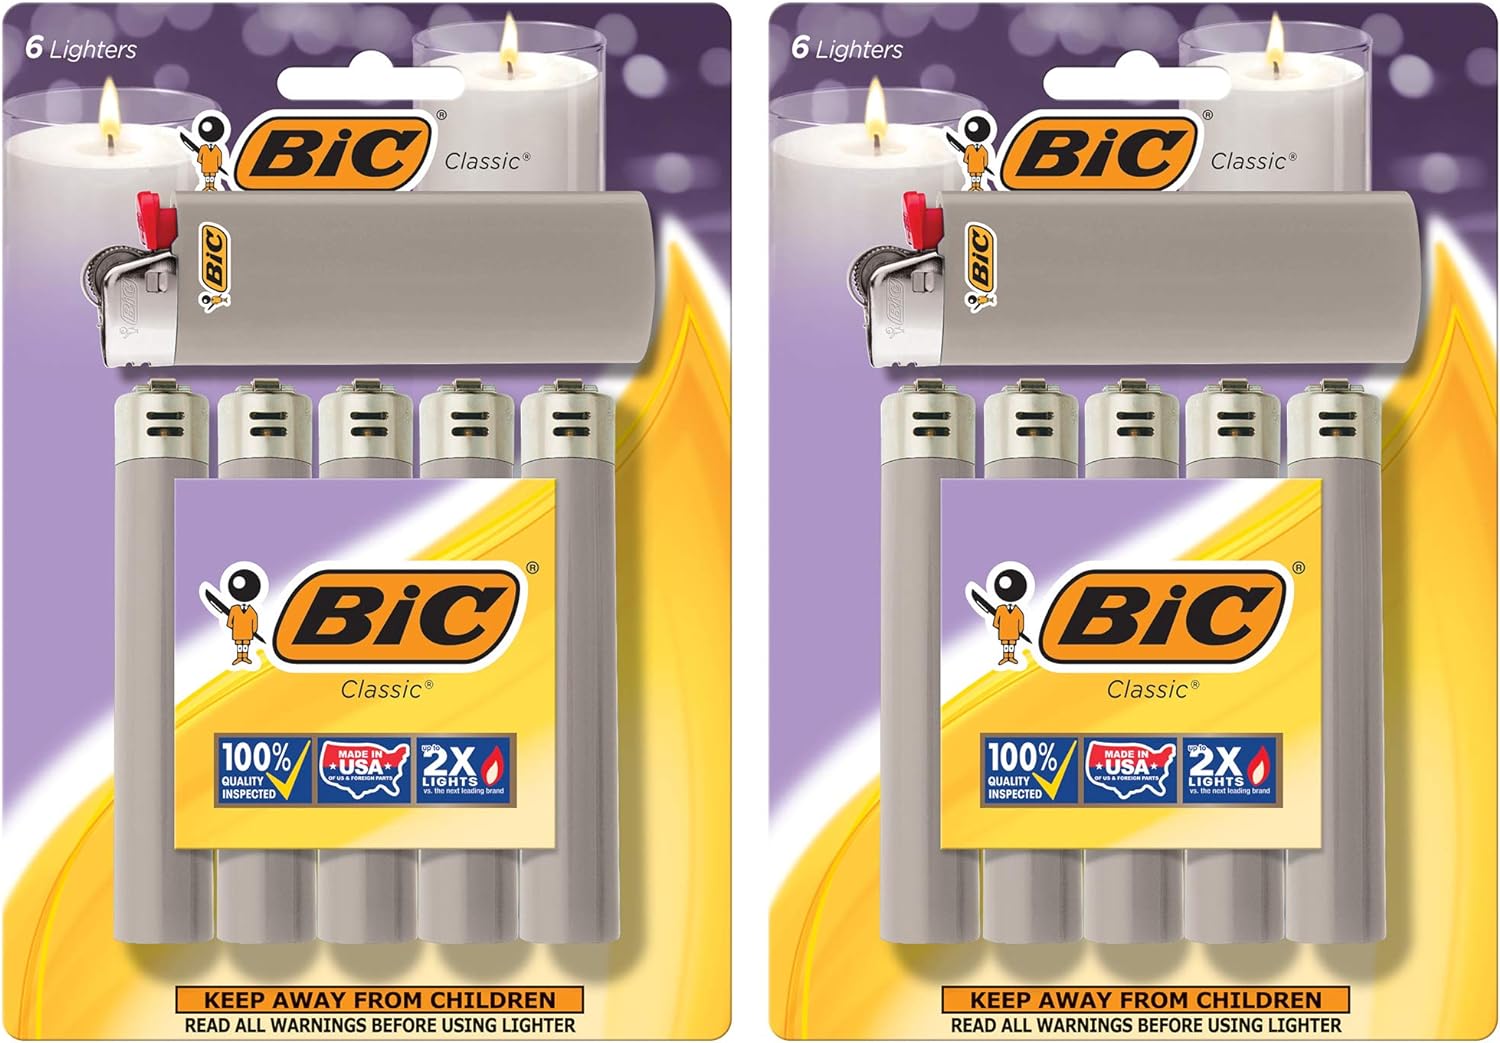 I ordered all yellow as I constantly misplace my lighter. Ive ordered mine from this seller many times over the years and theyve all been packaged and work great! I have problems using my right hand and I find the Bics are the easiest to use and the most dependable lighters out there.